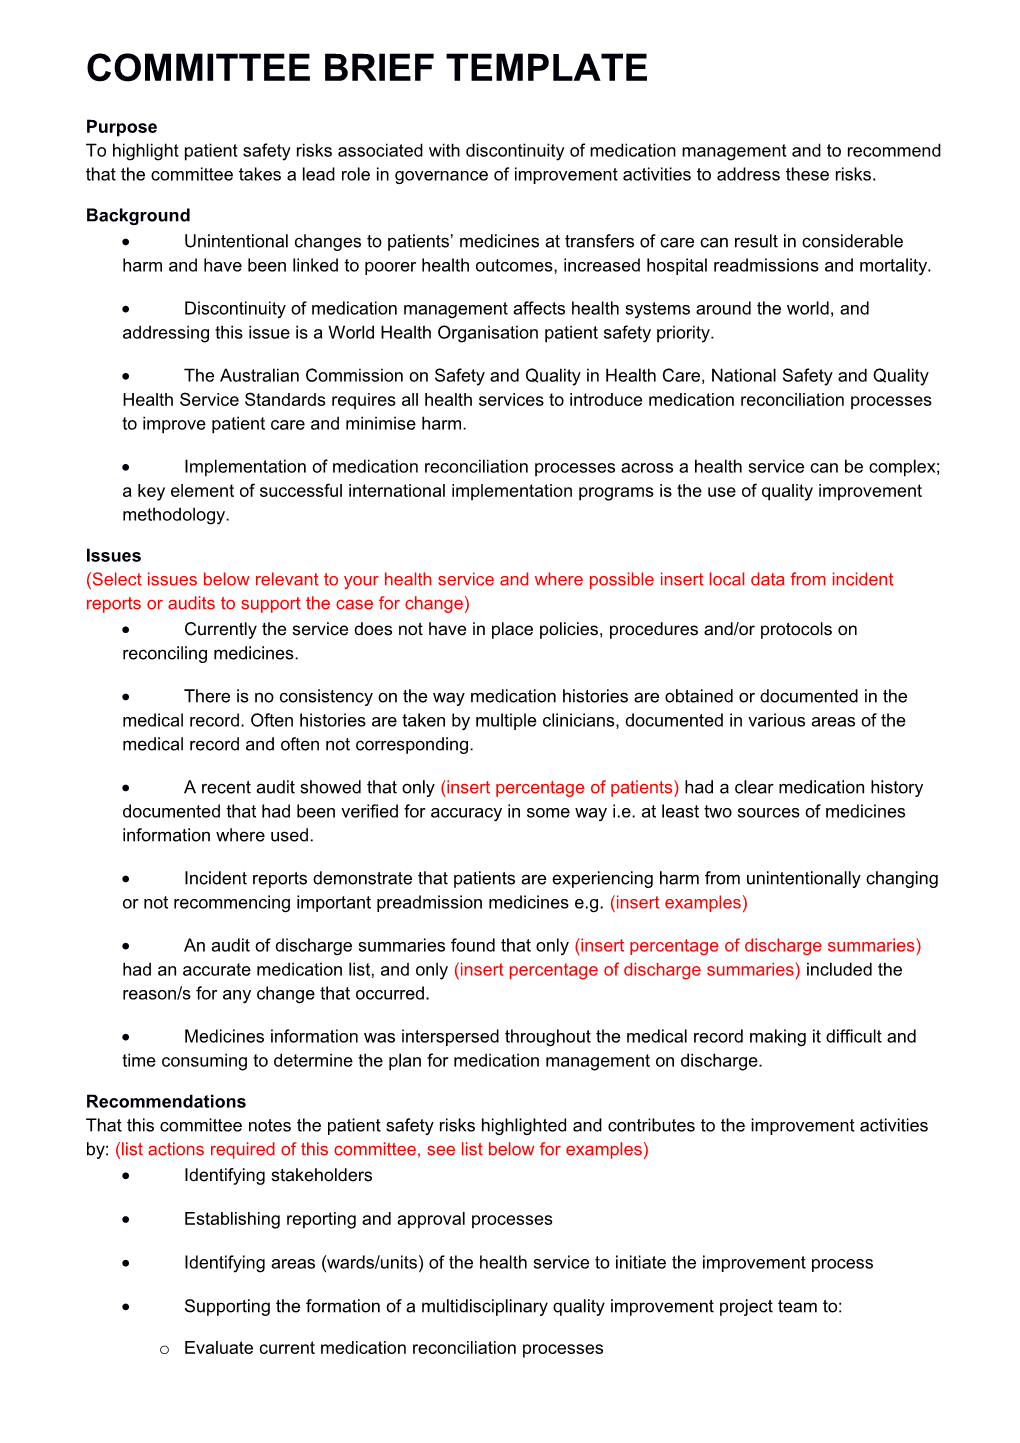 Committee Brief Template